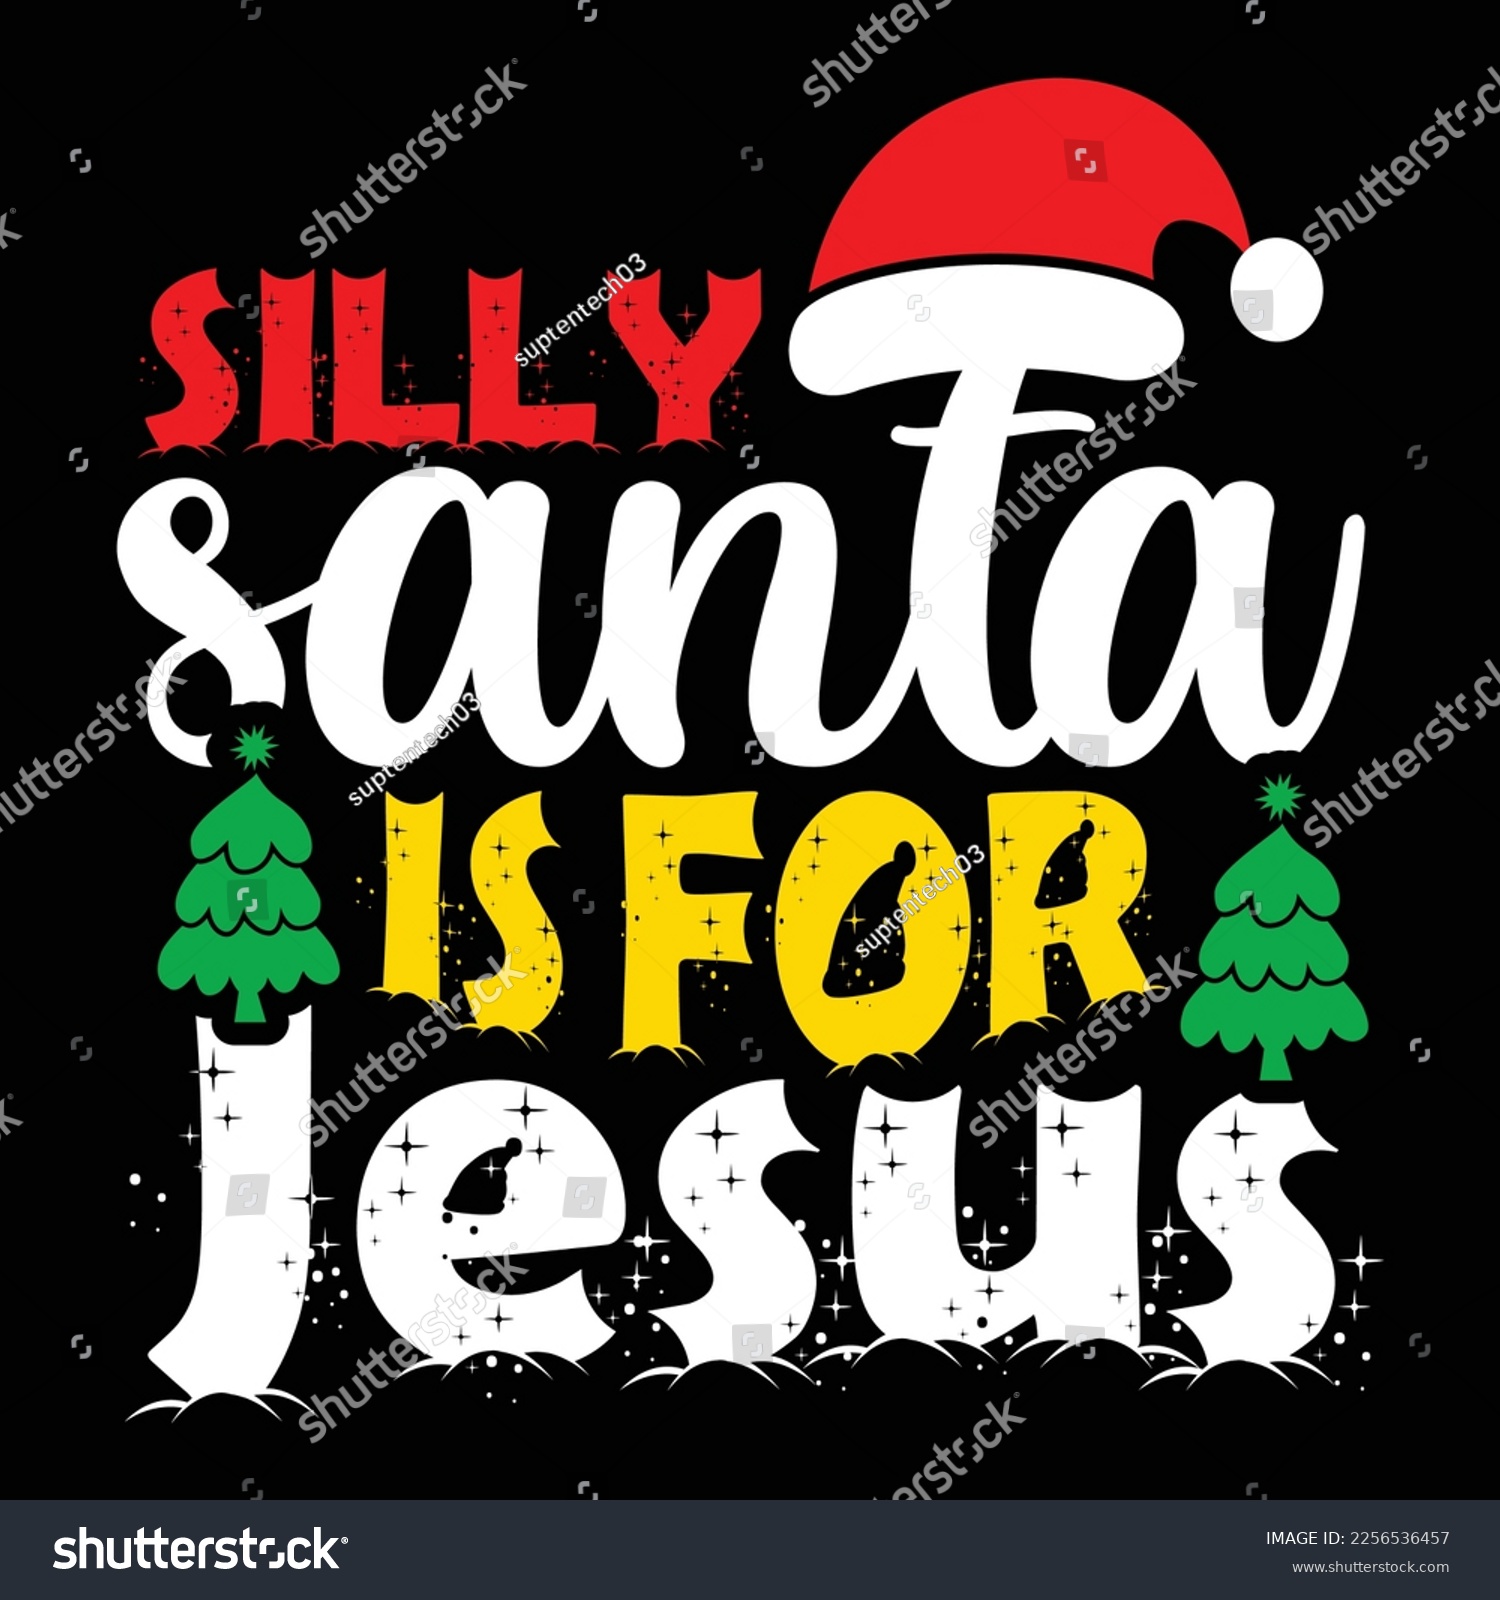 SVG of Silly Santa Is For Jesus, Merry Christmas shirts Print Template, Xmas Ugly Snow Santa Clouse New Year Holiday Candy Santa Hat vector illustration for Christmas hand lettered svg